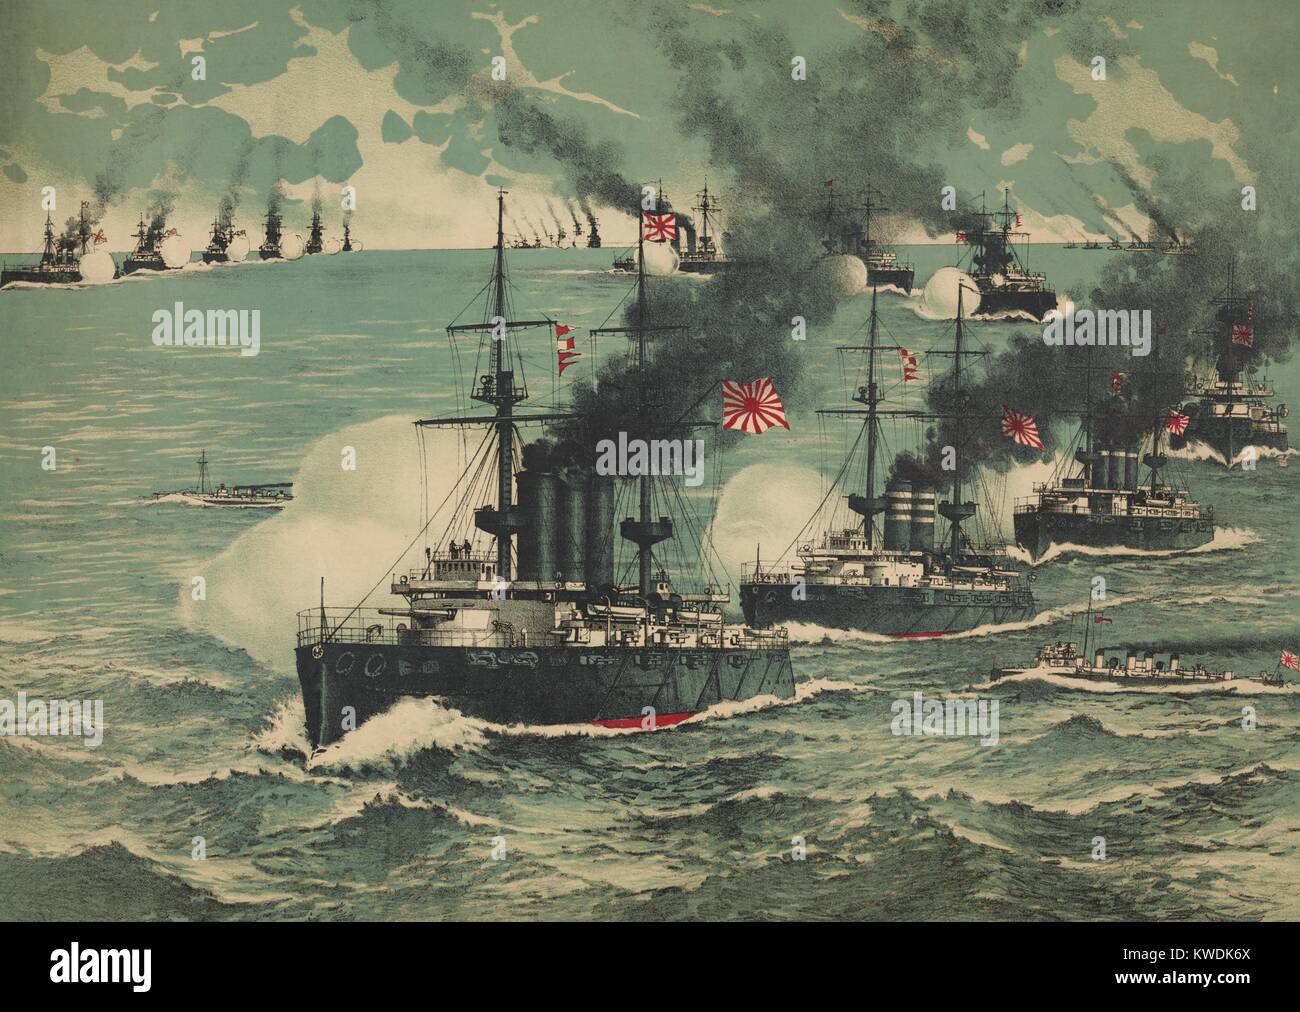 Battle of Port Arthur, Feb. 8-9, 1904 at the beginning of the Russo-Japanese War. Great Japanese Fleet bombarded Russian battleships in a surprise naval assault on the Russian fleet at Port Arthur (Lushun) (BSLOC 2017 18 89) Stock Photo